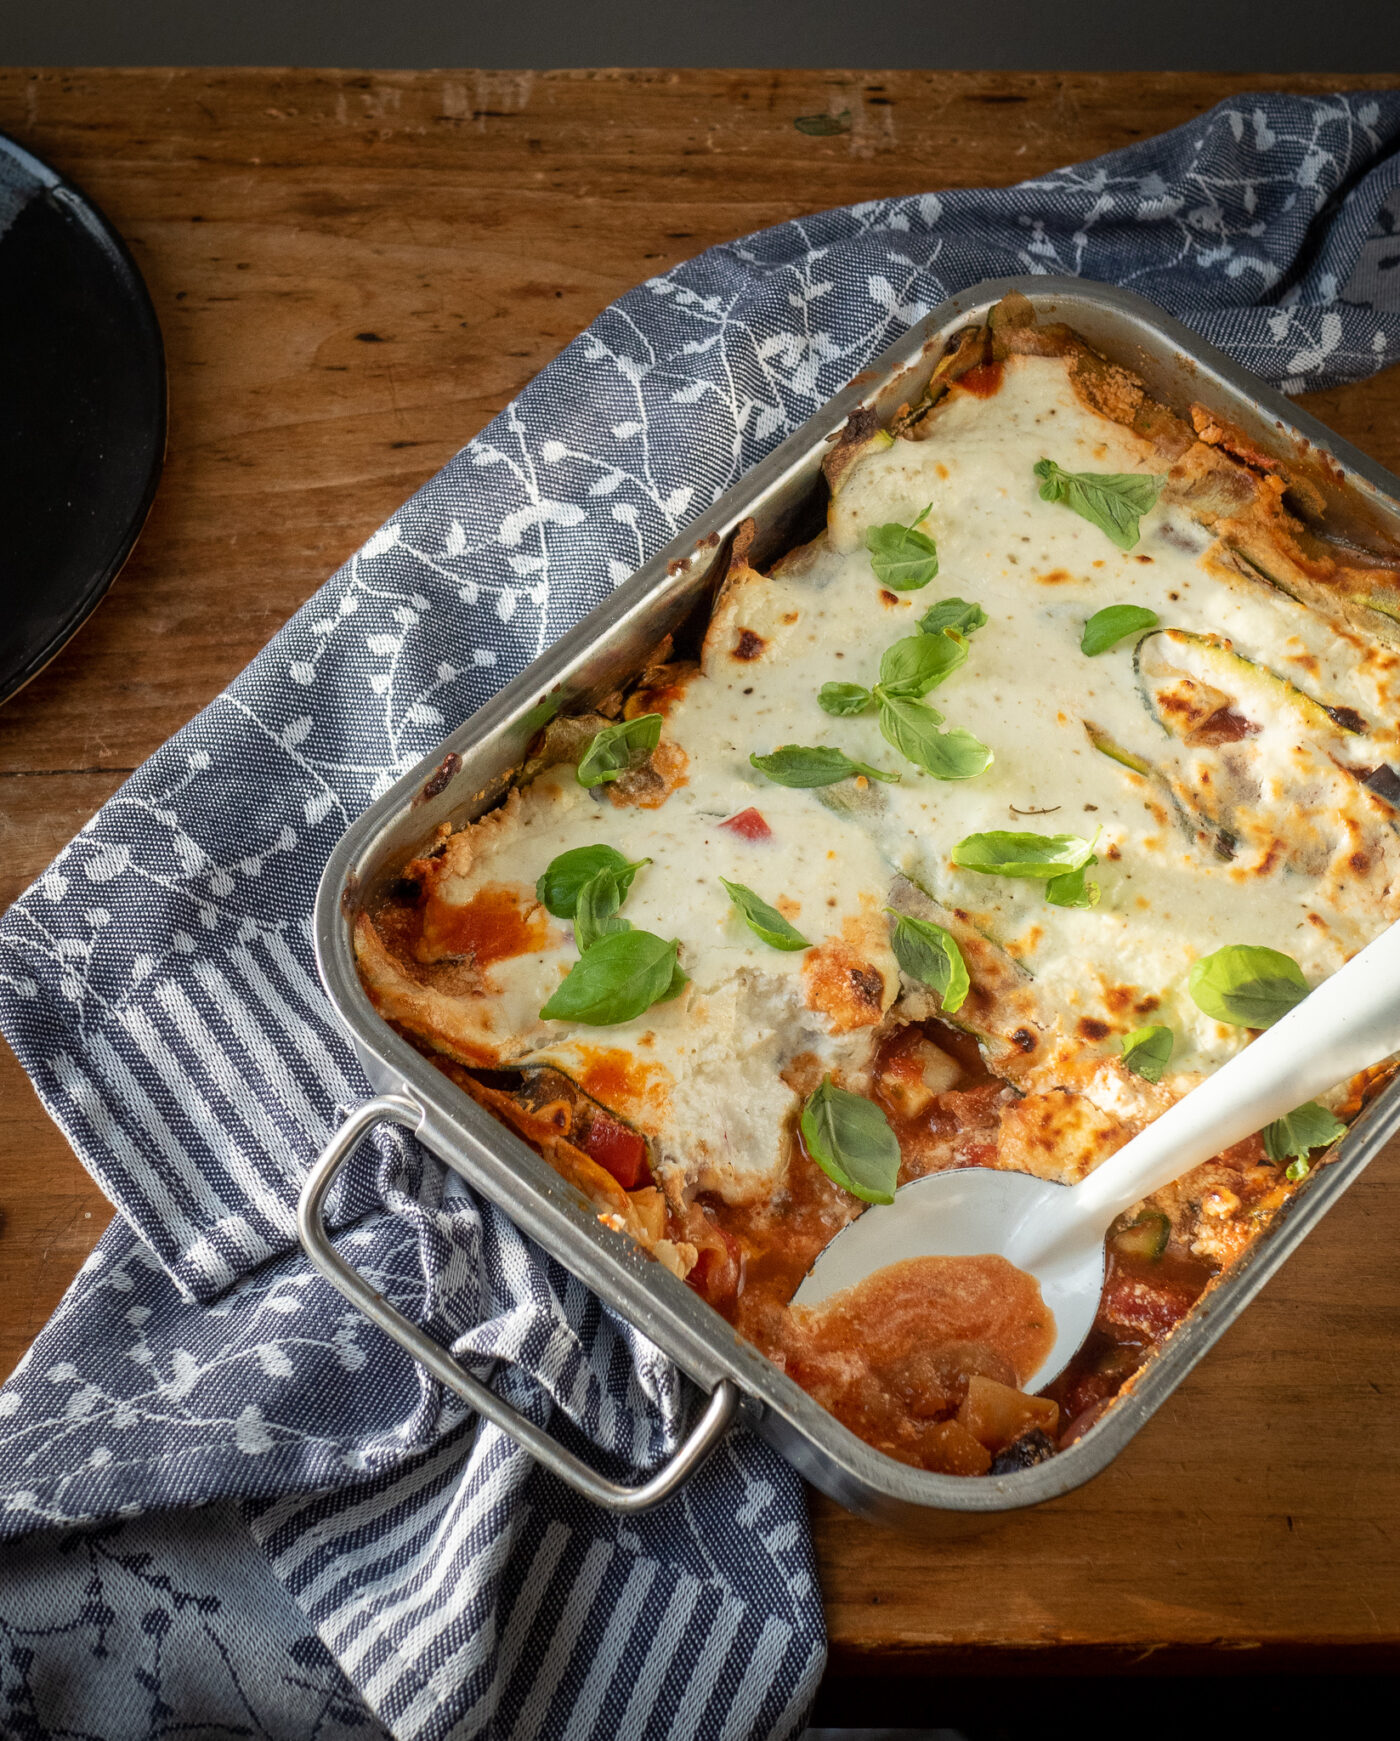 Courgette lasagne met ricotta-feta topping